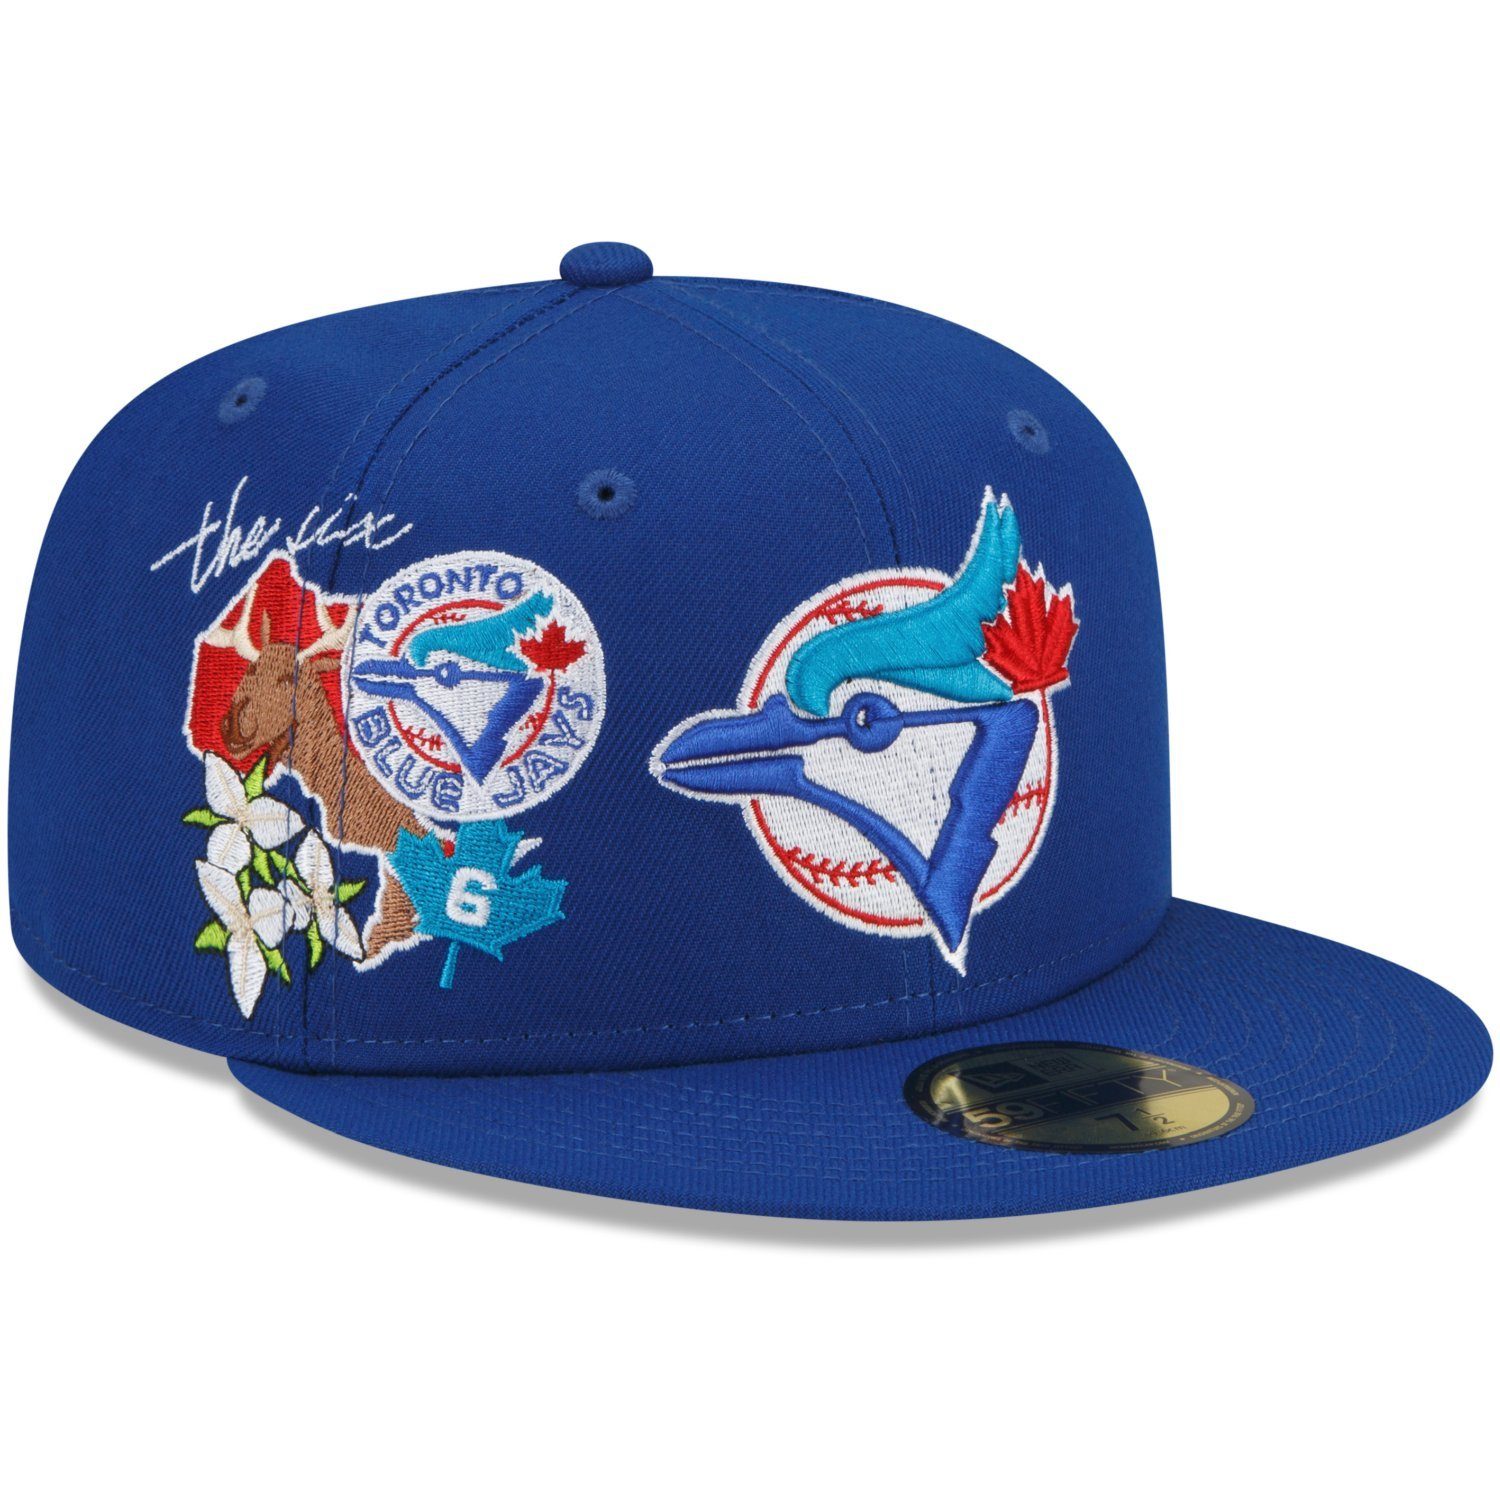 New Era Fitted Cap 59Fifty CITY CLUSTER Toronto Jays